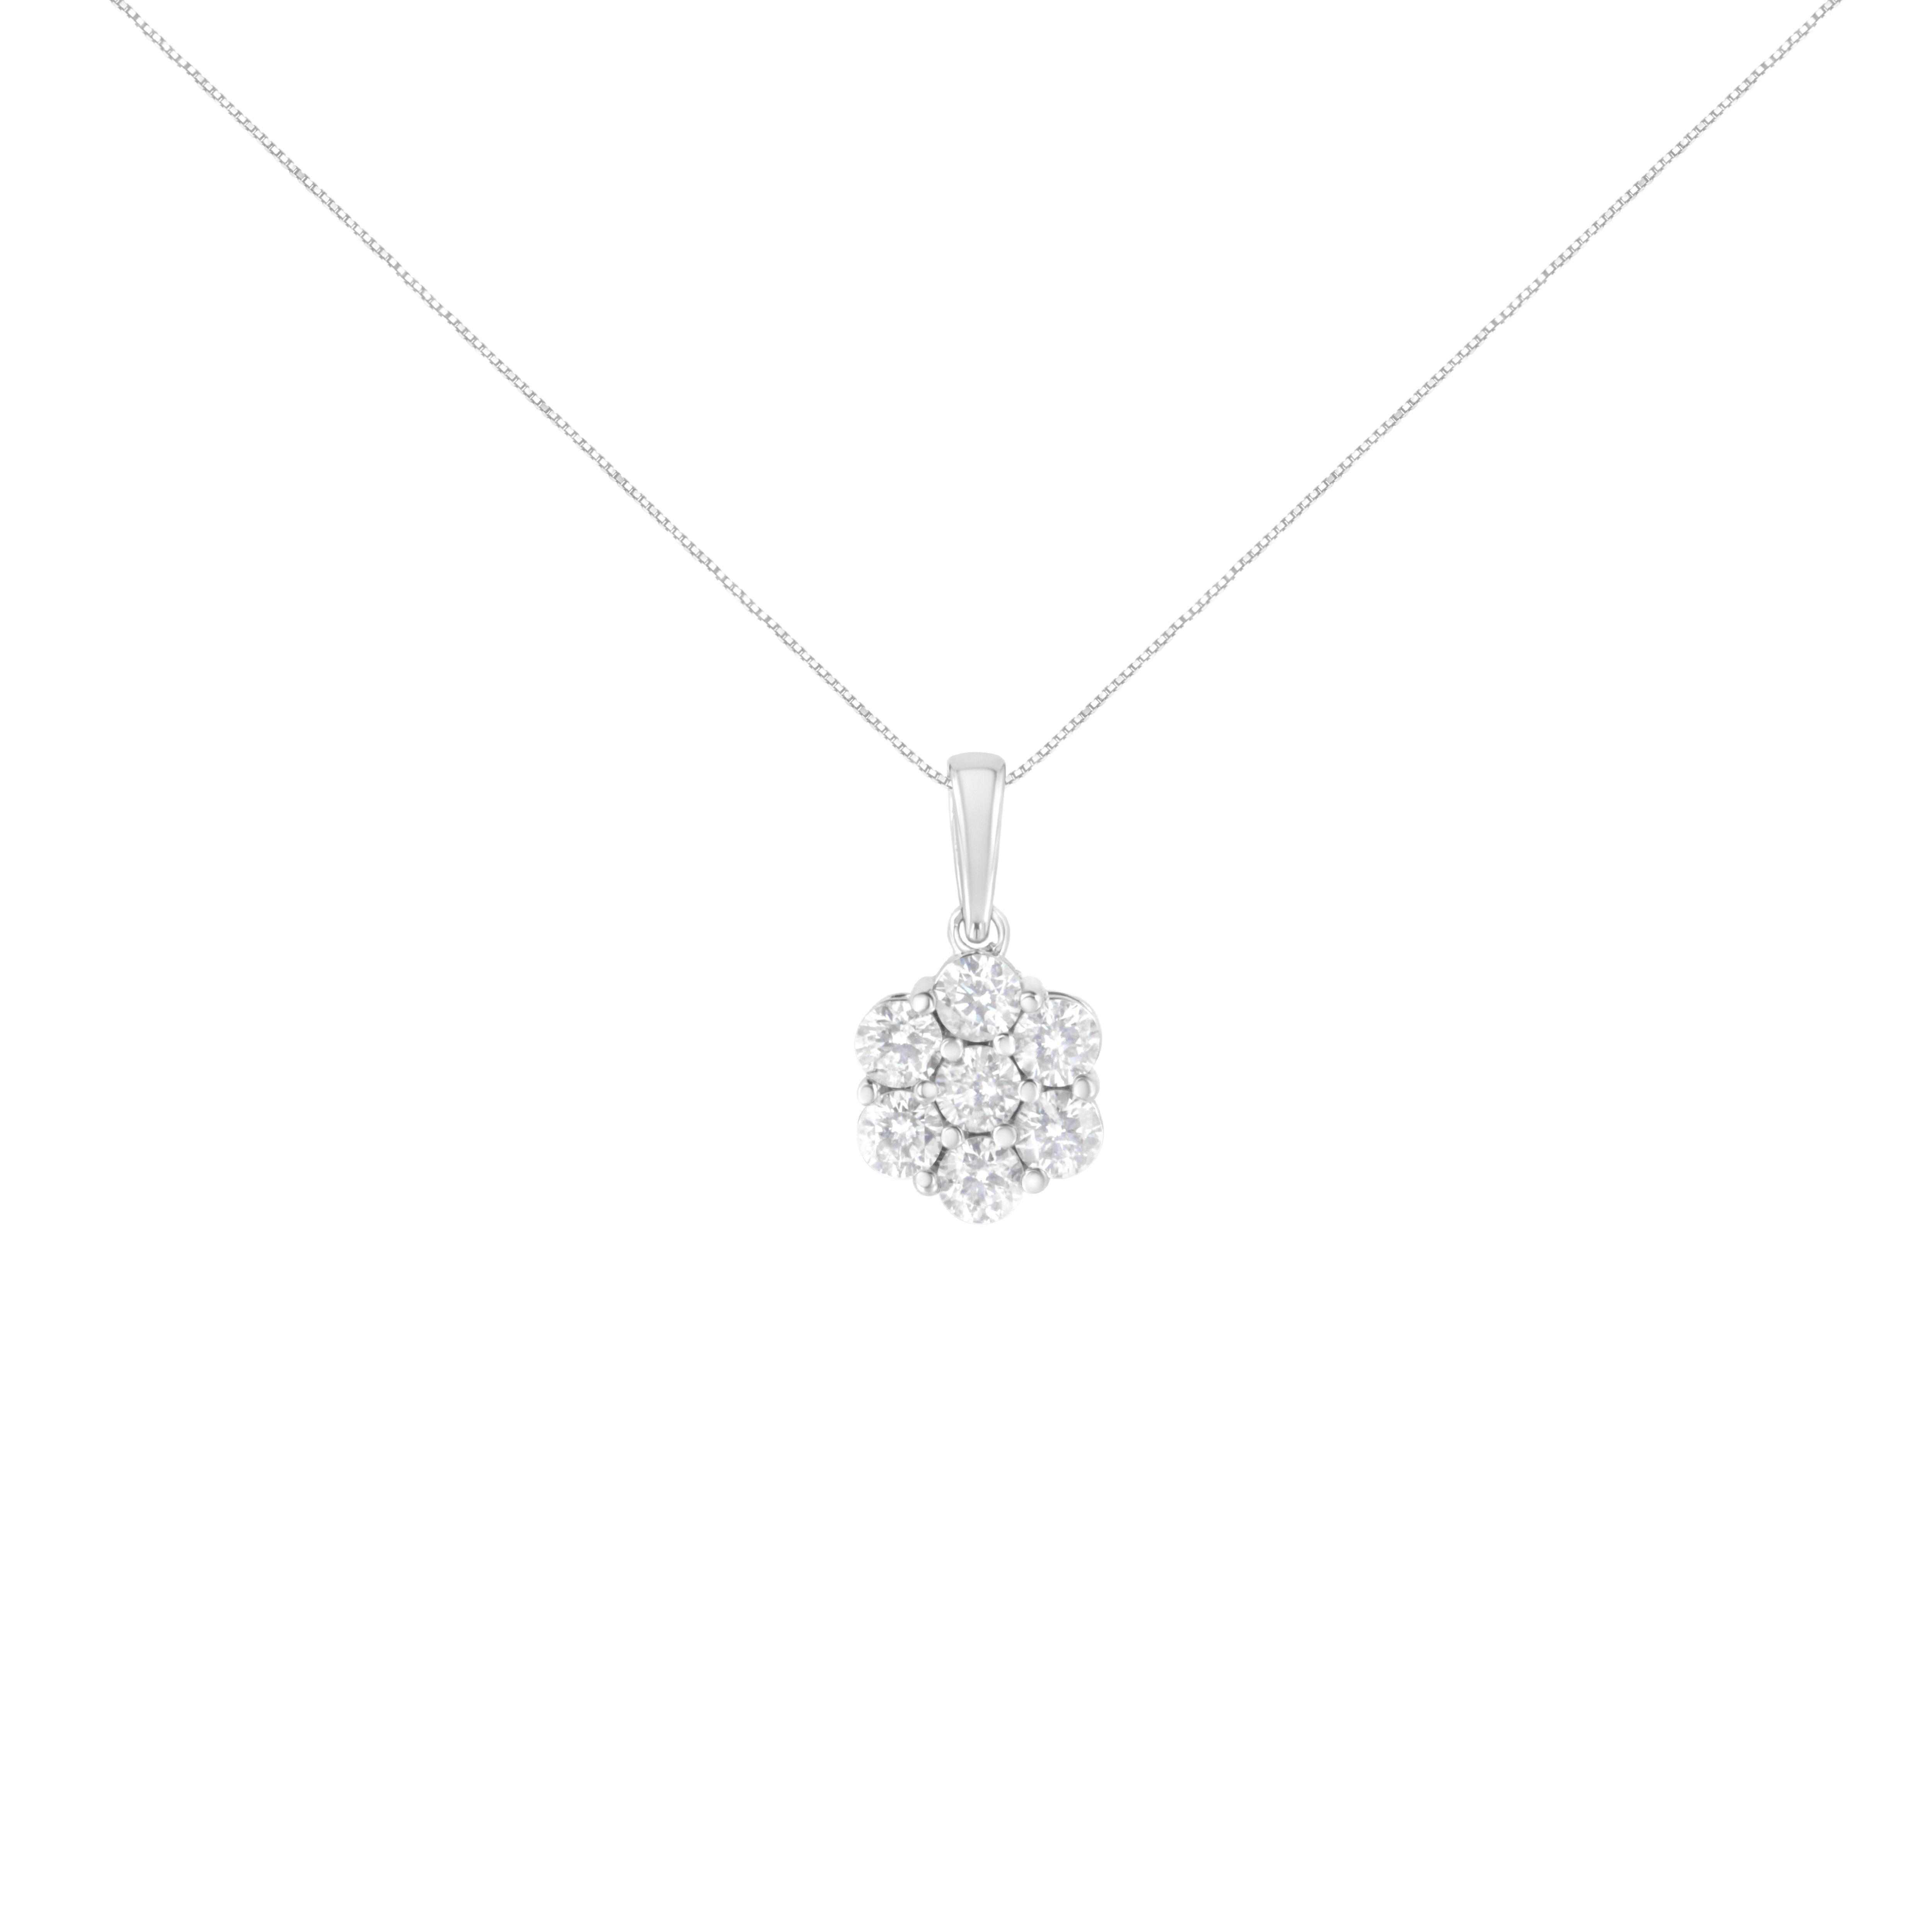 Chic and trendy, this elegant 14k white gold pendant has a floral design set with 7 round-cut, natural diamonds in a prong setting. The diamonds shine and has an impressive total carat weight of 2 cttw. The floral motif hangs from a 18